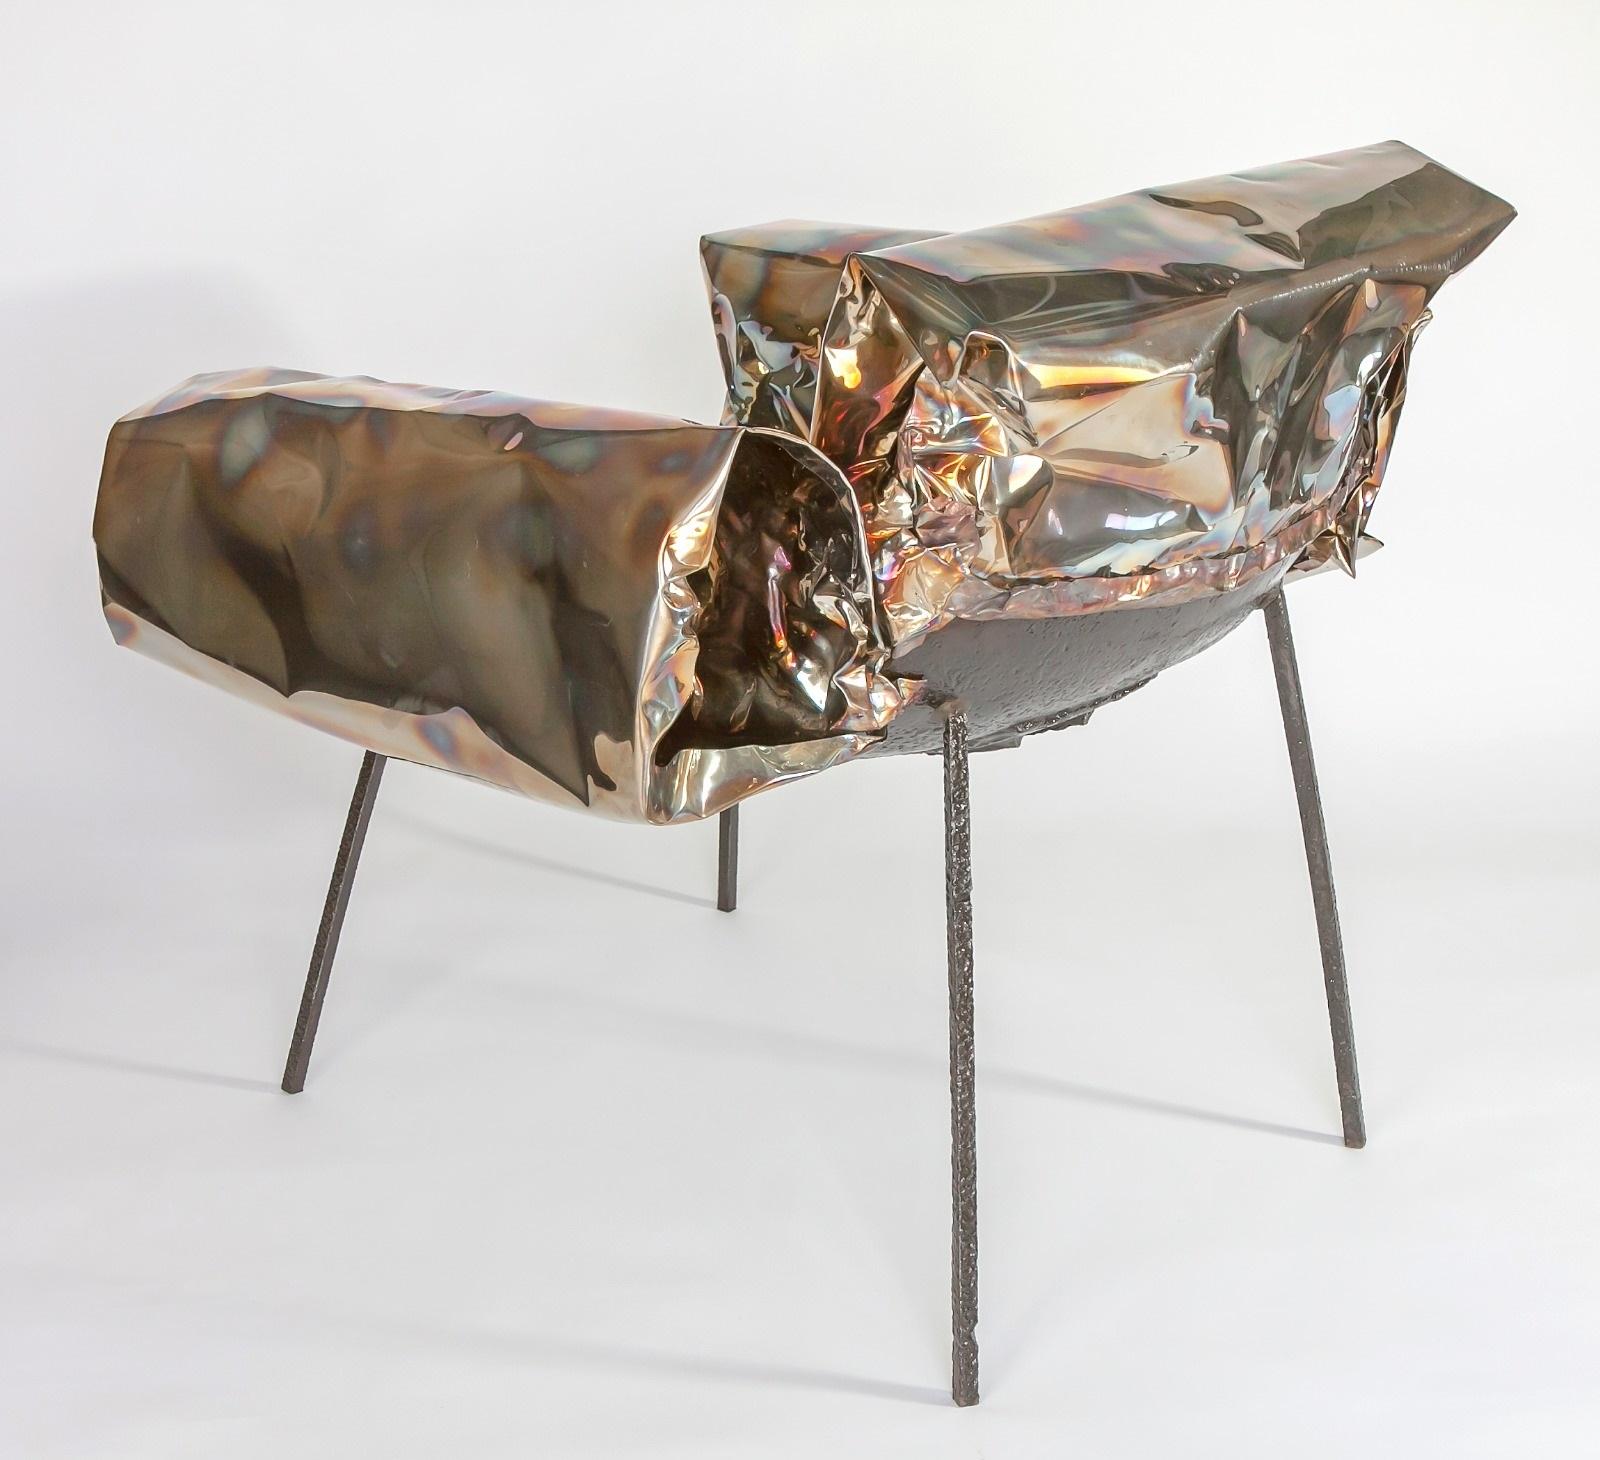 Modern Handmade Stainless Steel Sculptural Armchair by Anadora Lupo For Sale